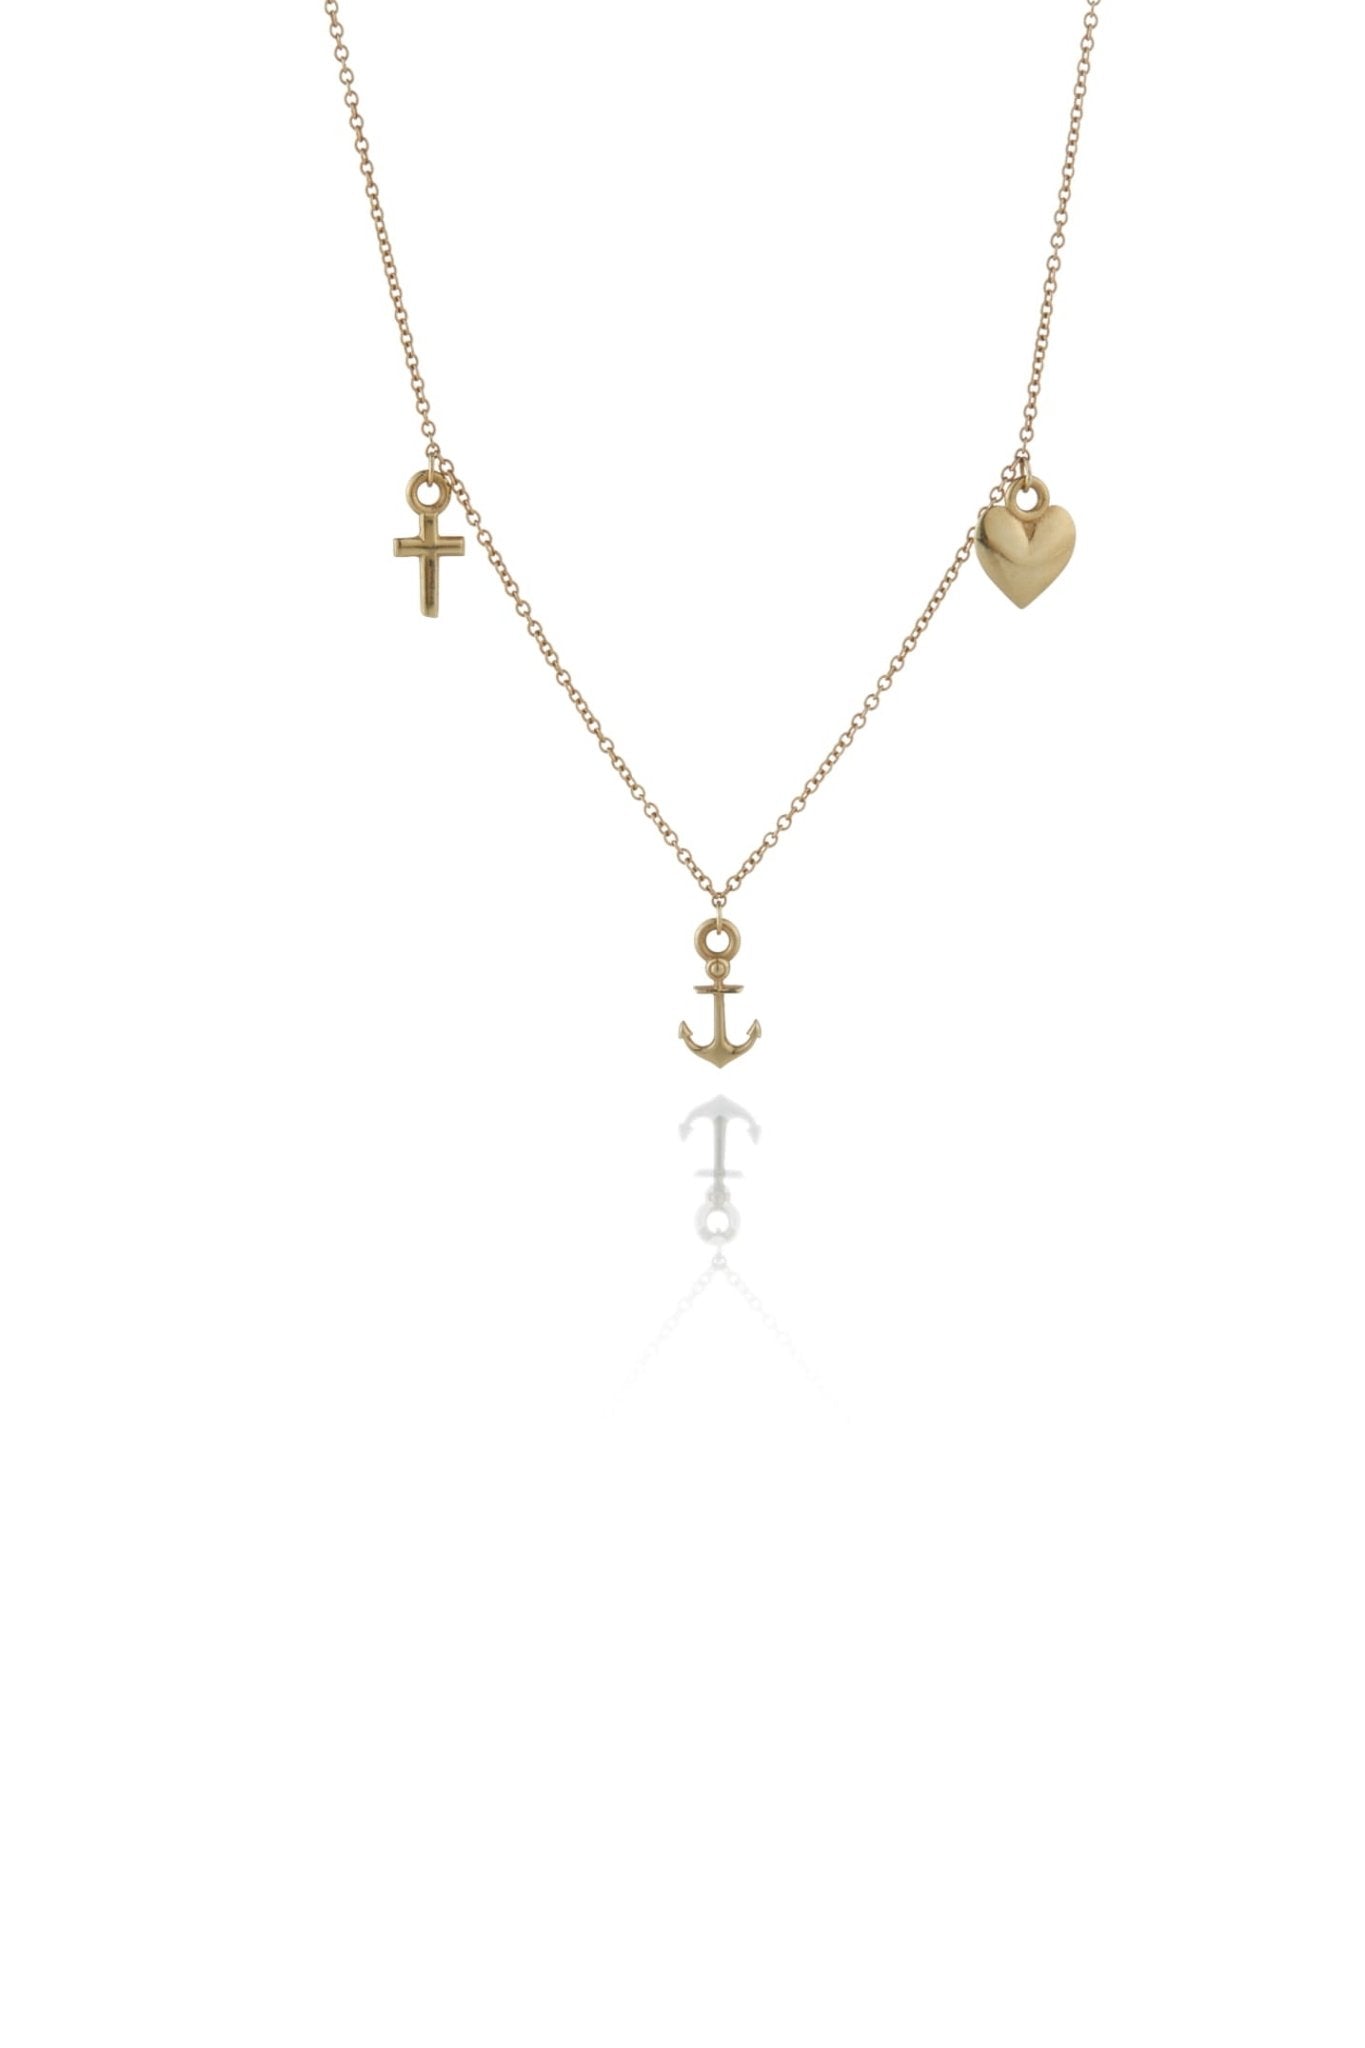 Faith Hope Charity Necklace | Faith necklace, Sterling silver pendants,  Necklace